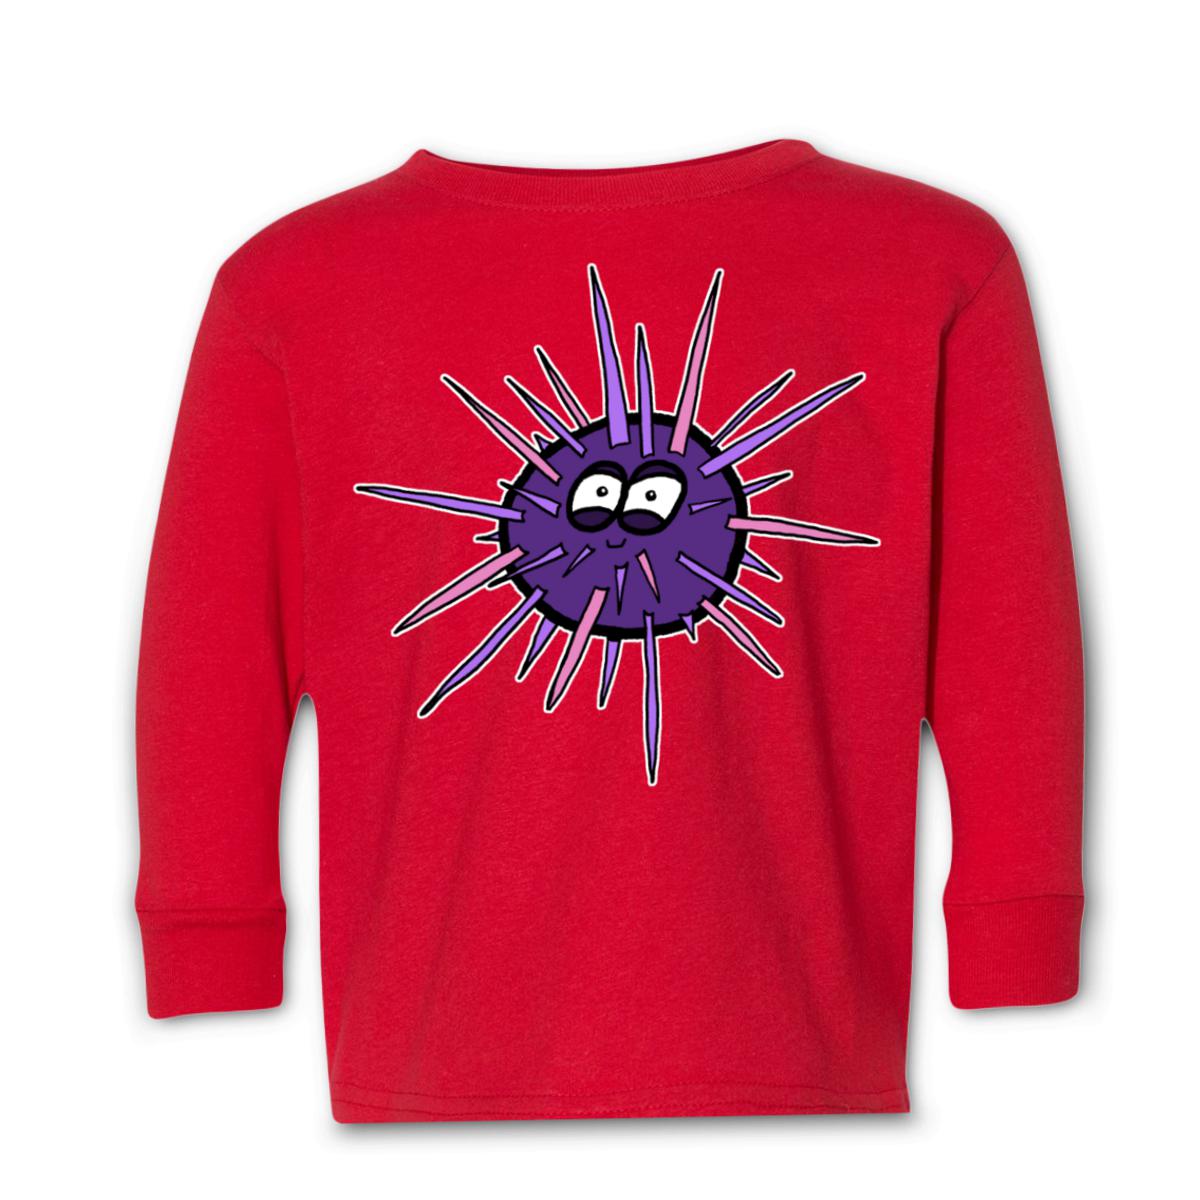 Sea Urchin Toddler Long Sleeve Tee 4T red